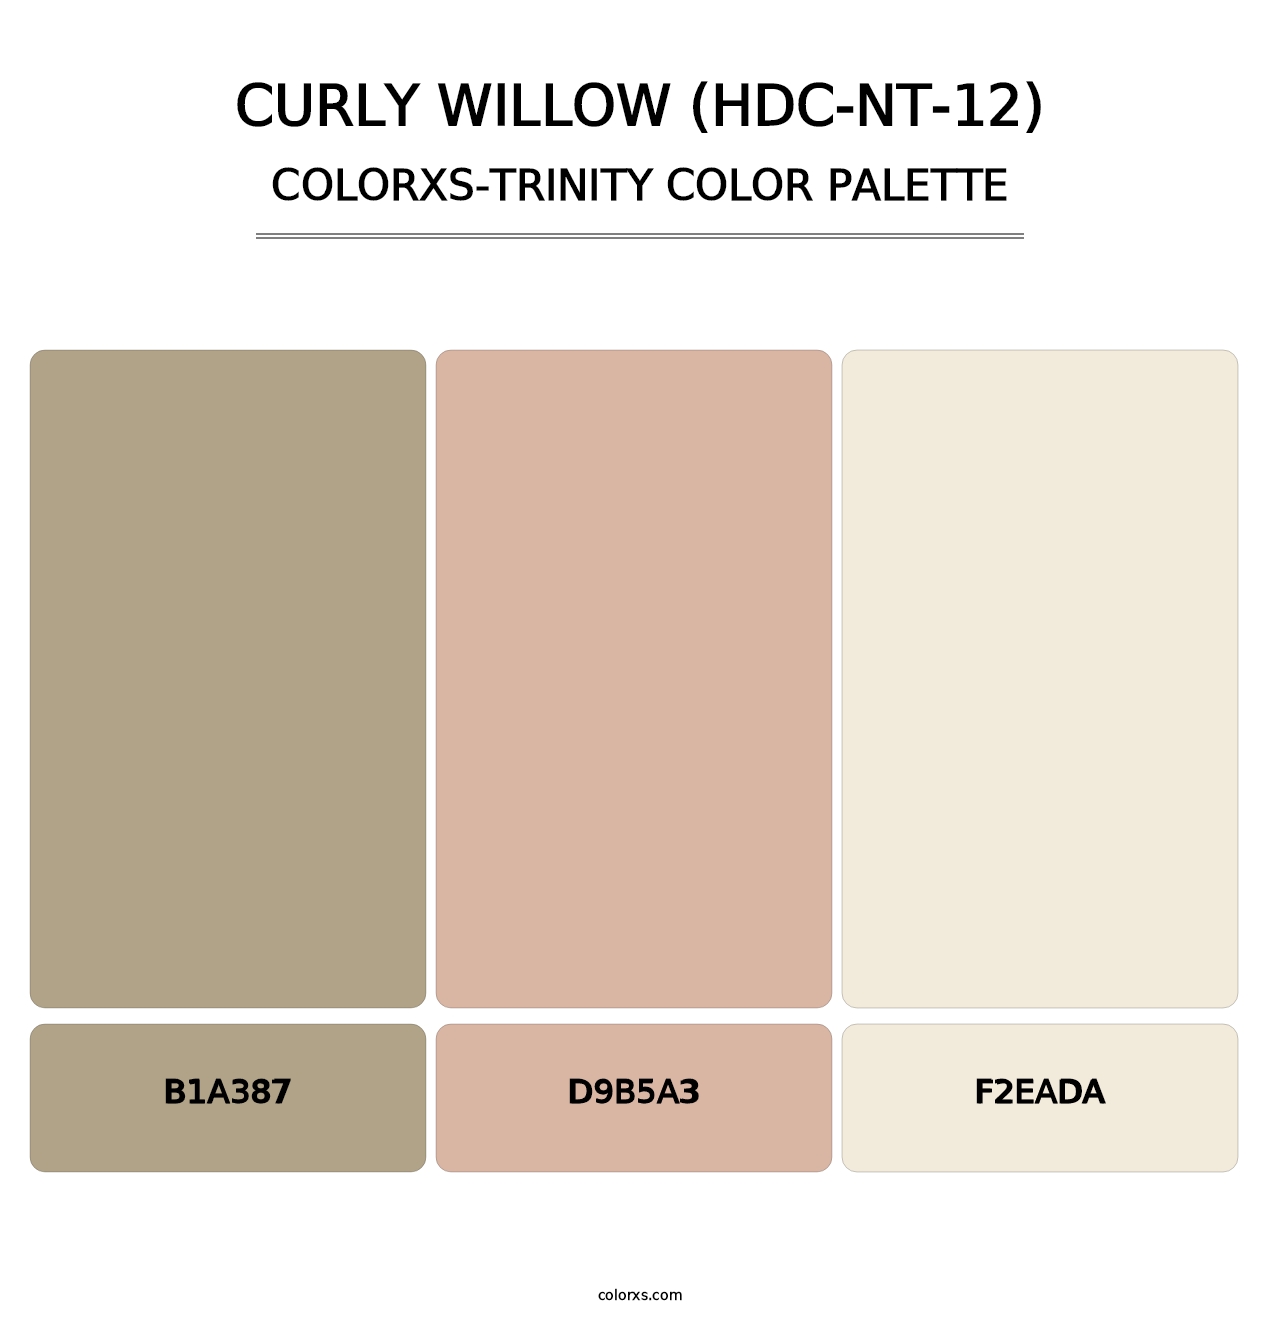 Curly Willow (HDC-NT-12) - Colorxs Trinity Palette